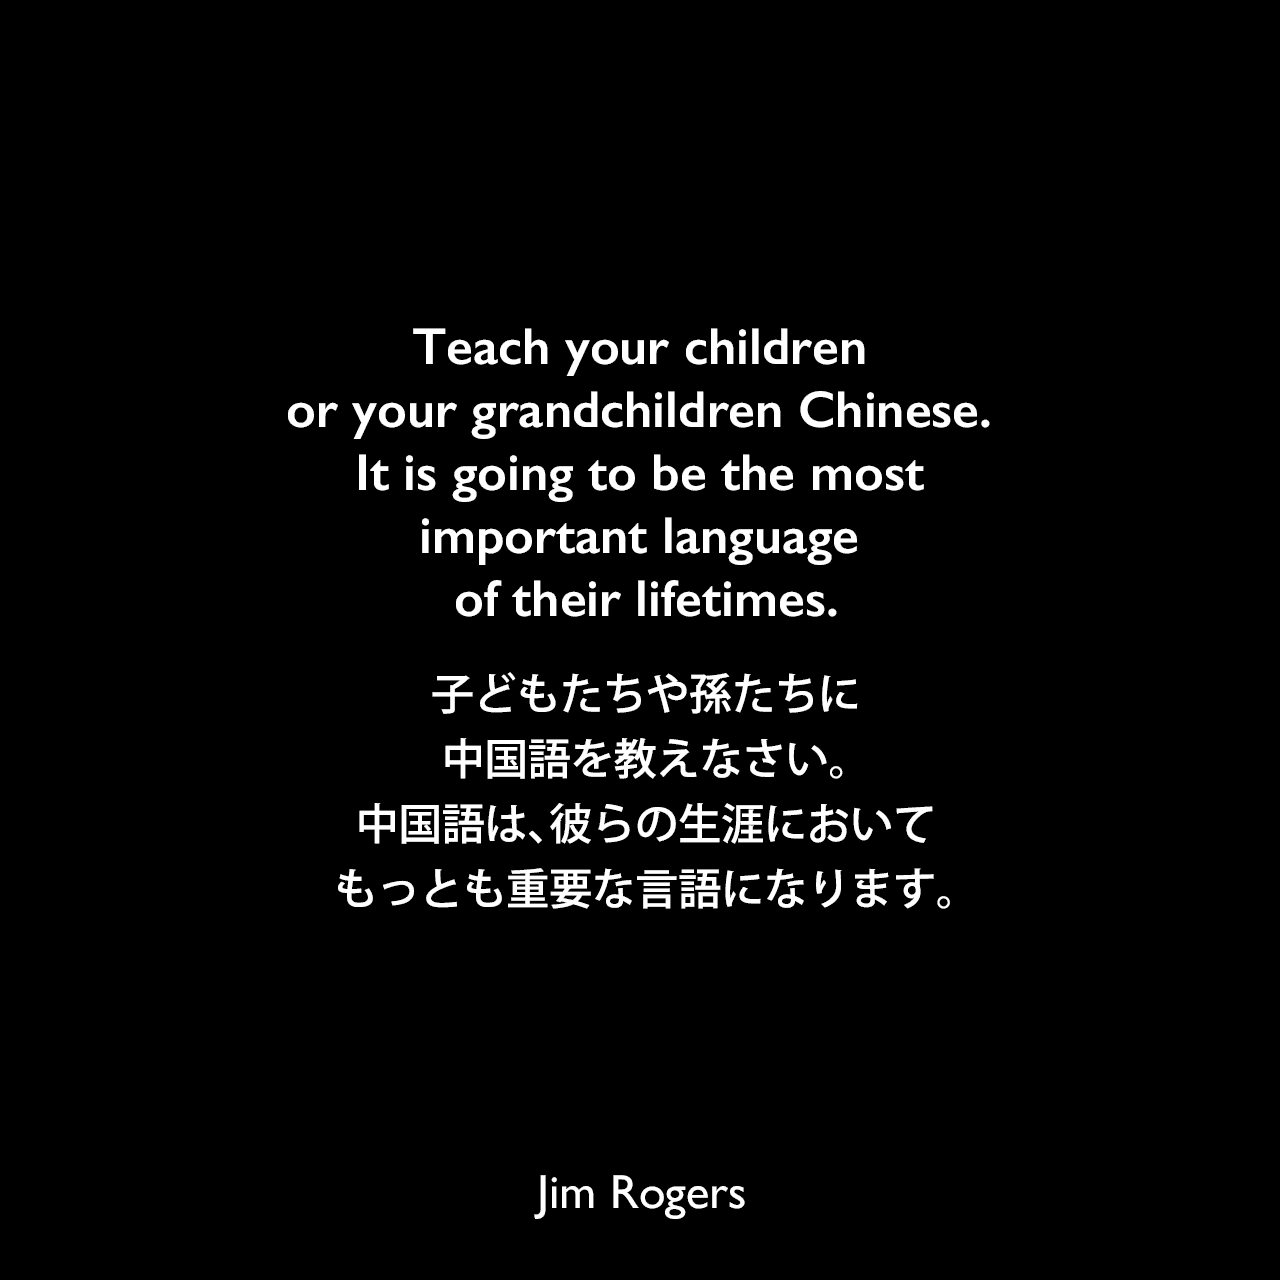 Teach your children or your grandchildren Chinese. It is going to be the most important language of their lifetimes.子どもたちや孫たちに中国語を教えなさい。中国語は、彼らの生涯においてもっとも重要な言語になります。《参照：A Bull in China: Investing Profitably in the World's Greatest Market(2007)》Jim Rogers